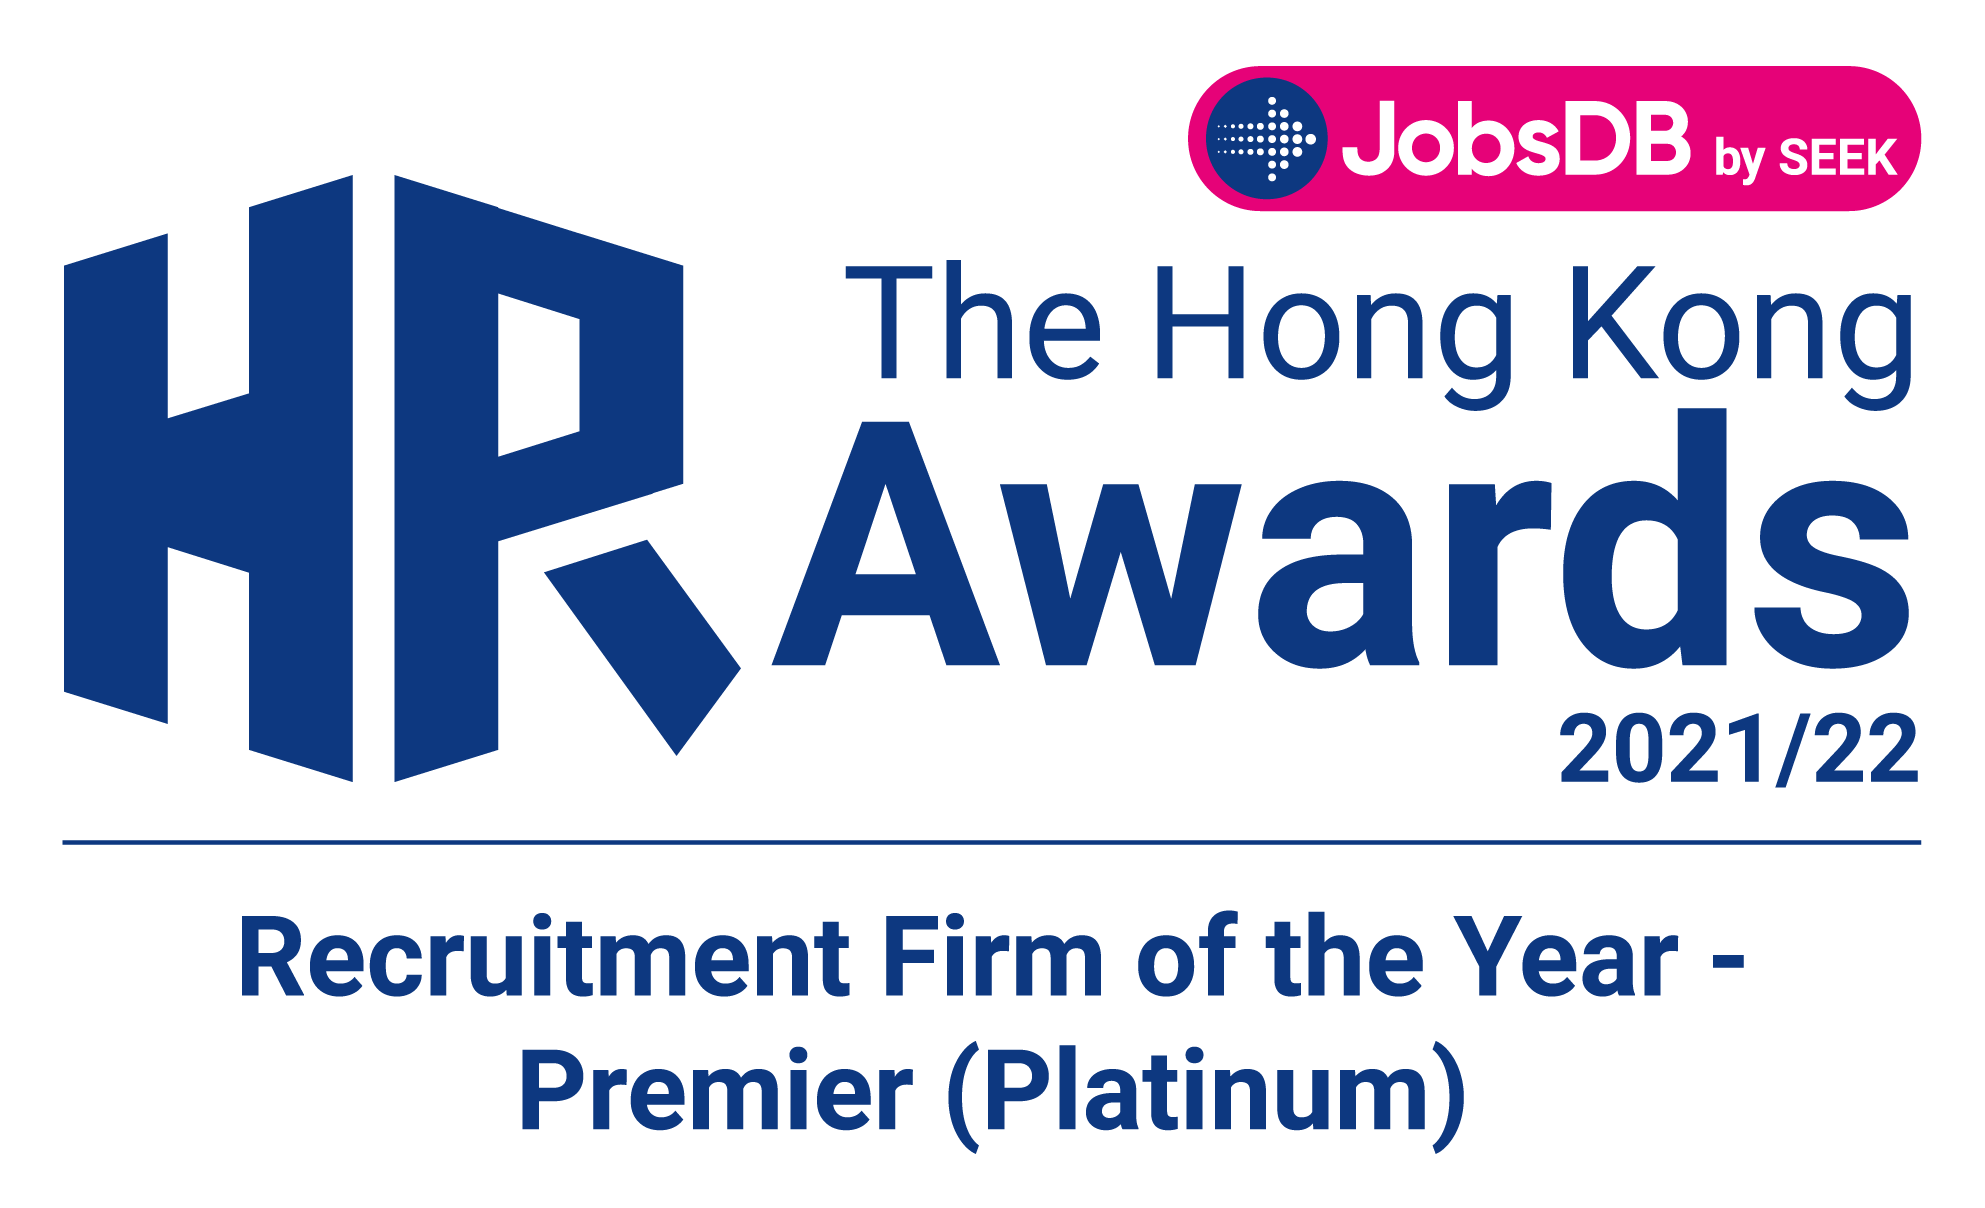 JobsDB Recruitment Firm of the Year